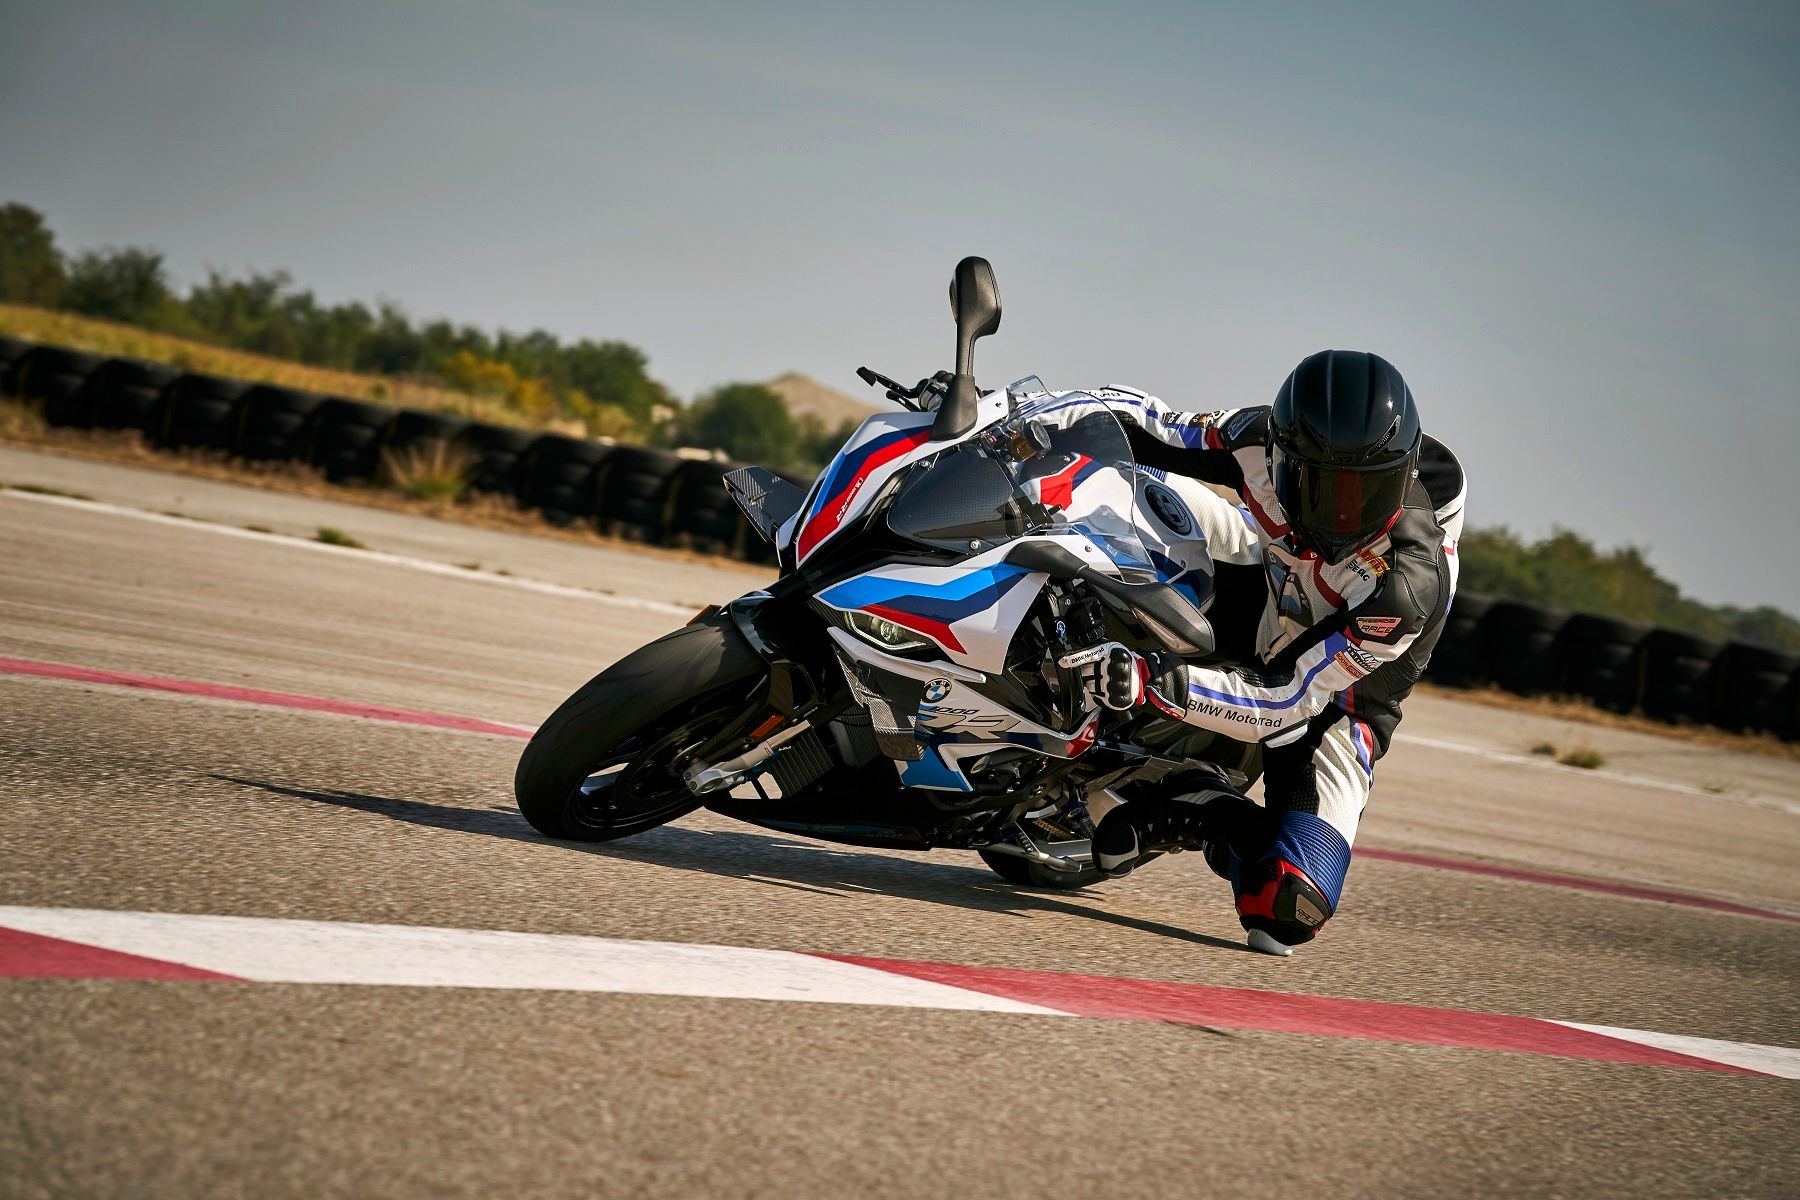 BMW Motorrad India hikes prices of four motorcycles